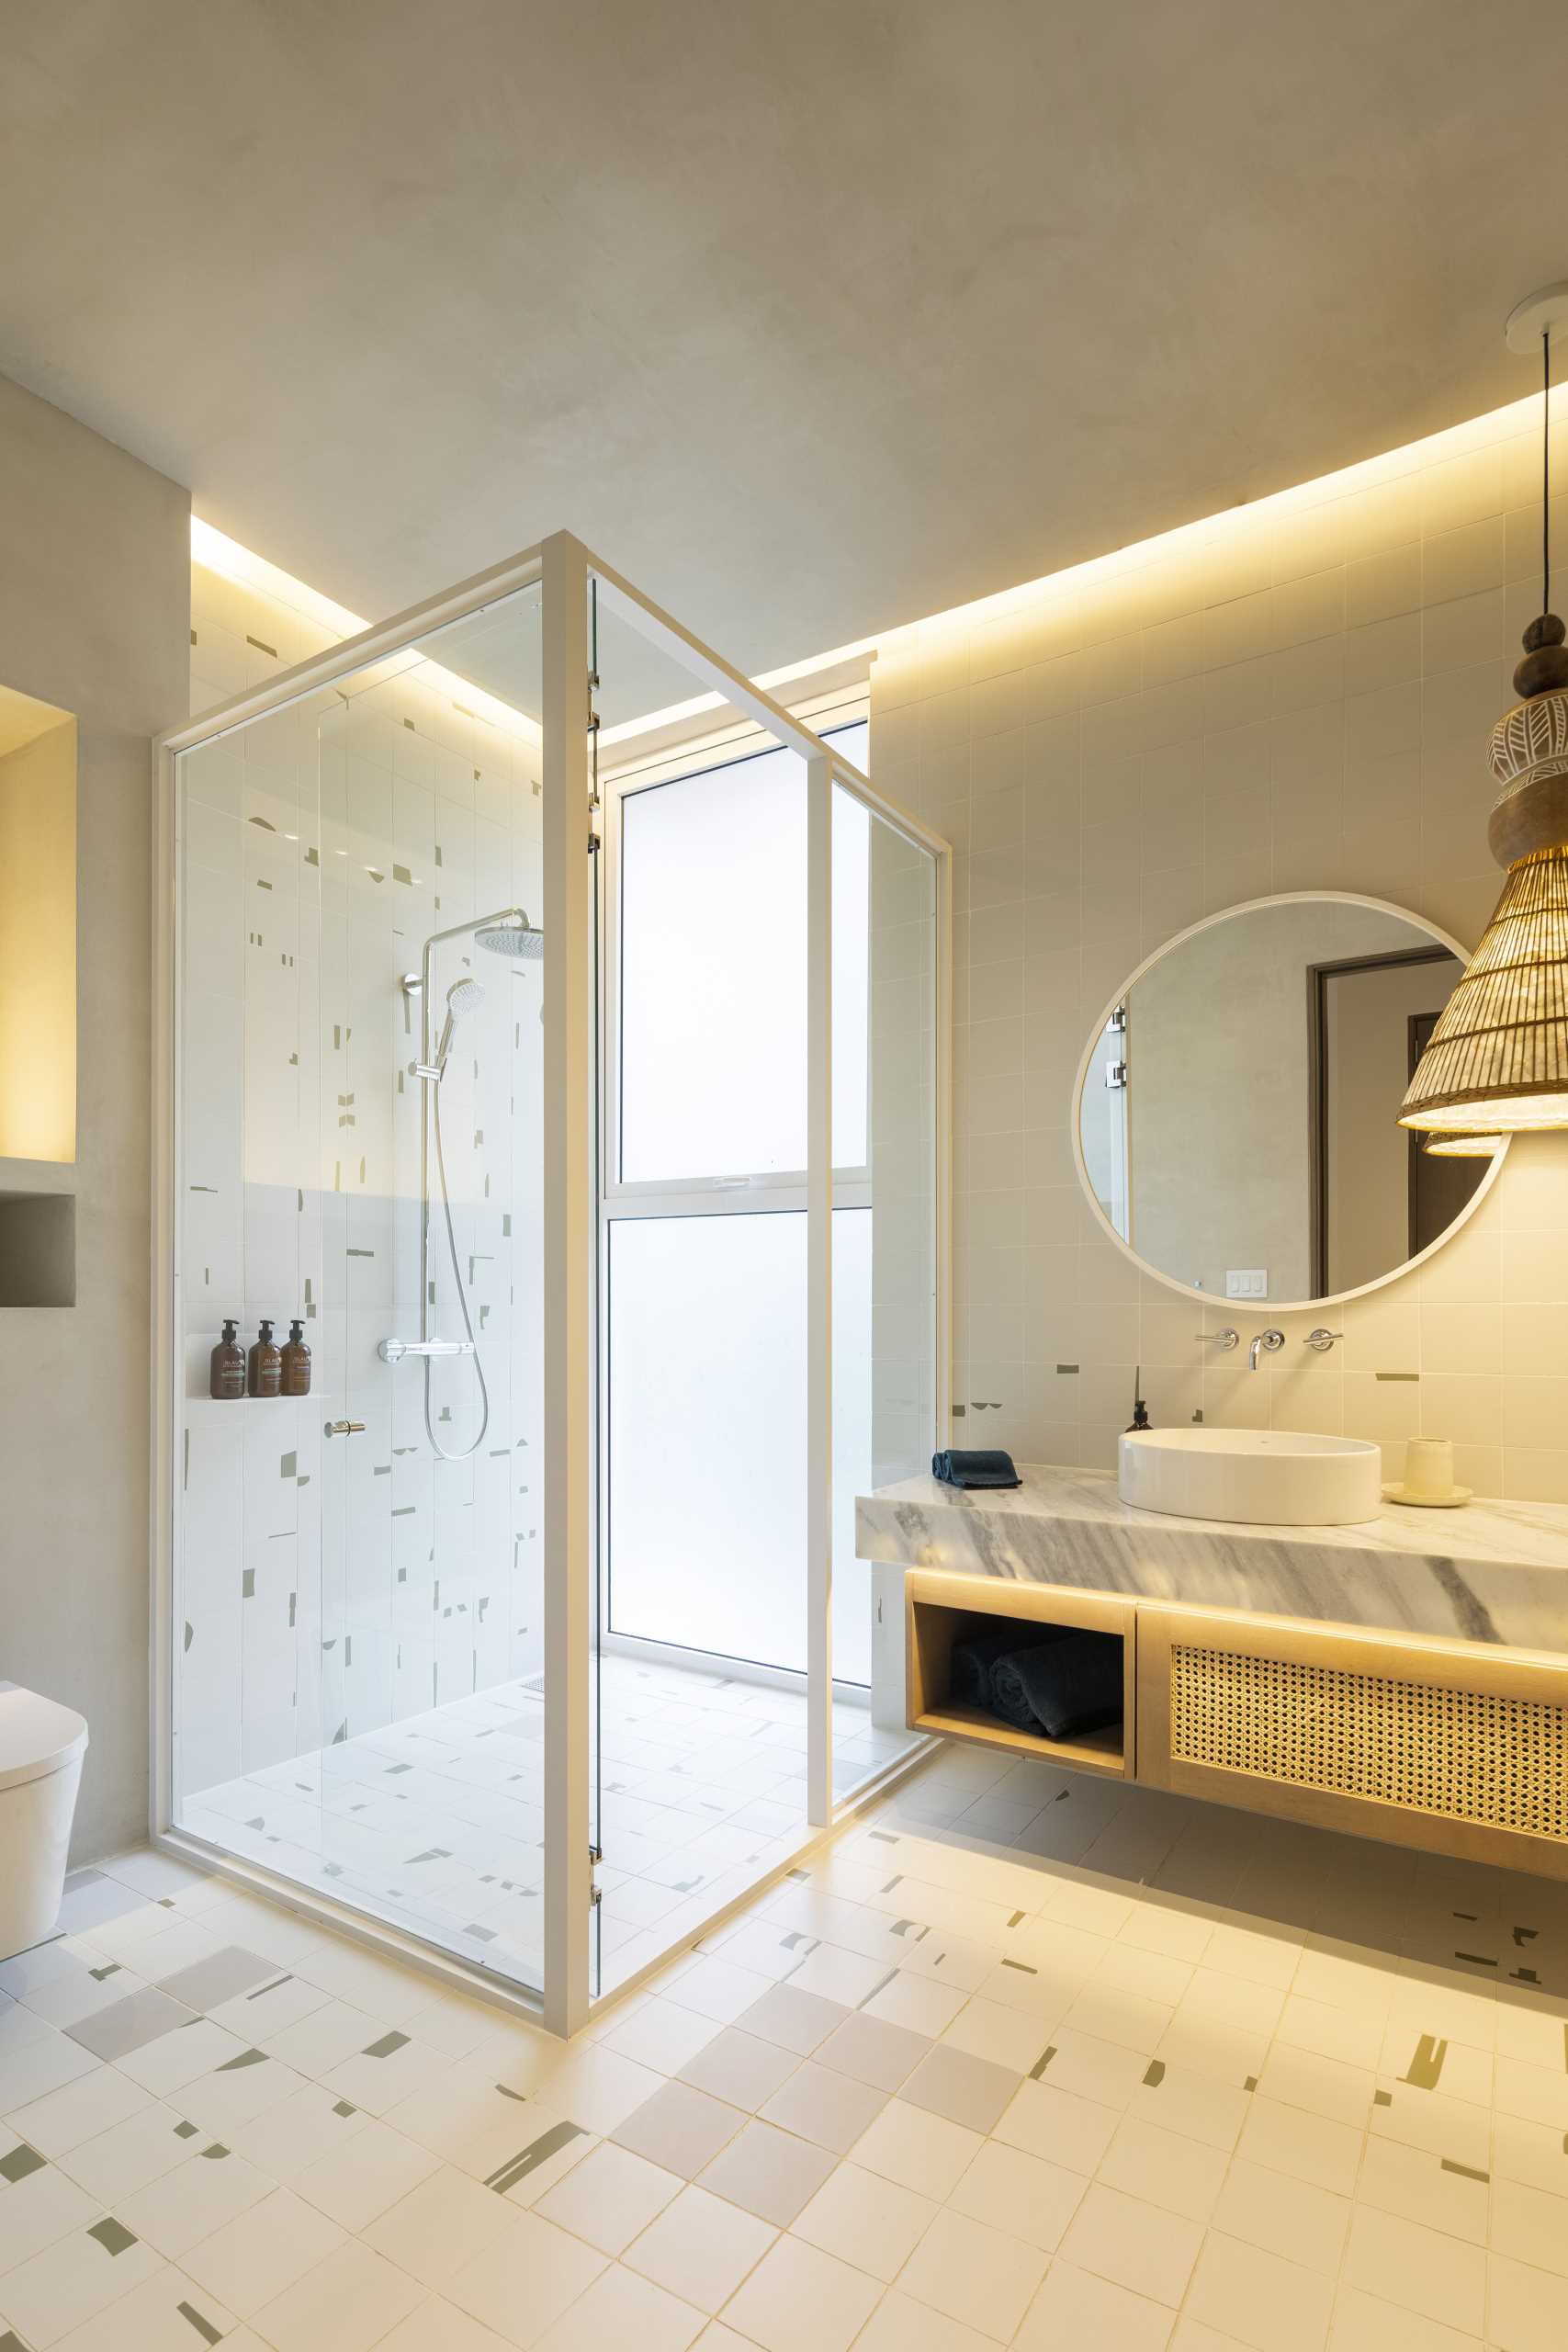 A modern bathroom with hidden lighting, a floating vanity, and a walk-in shower.